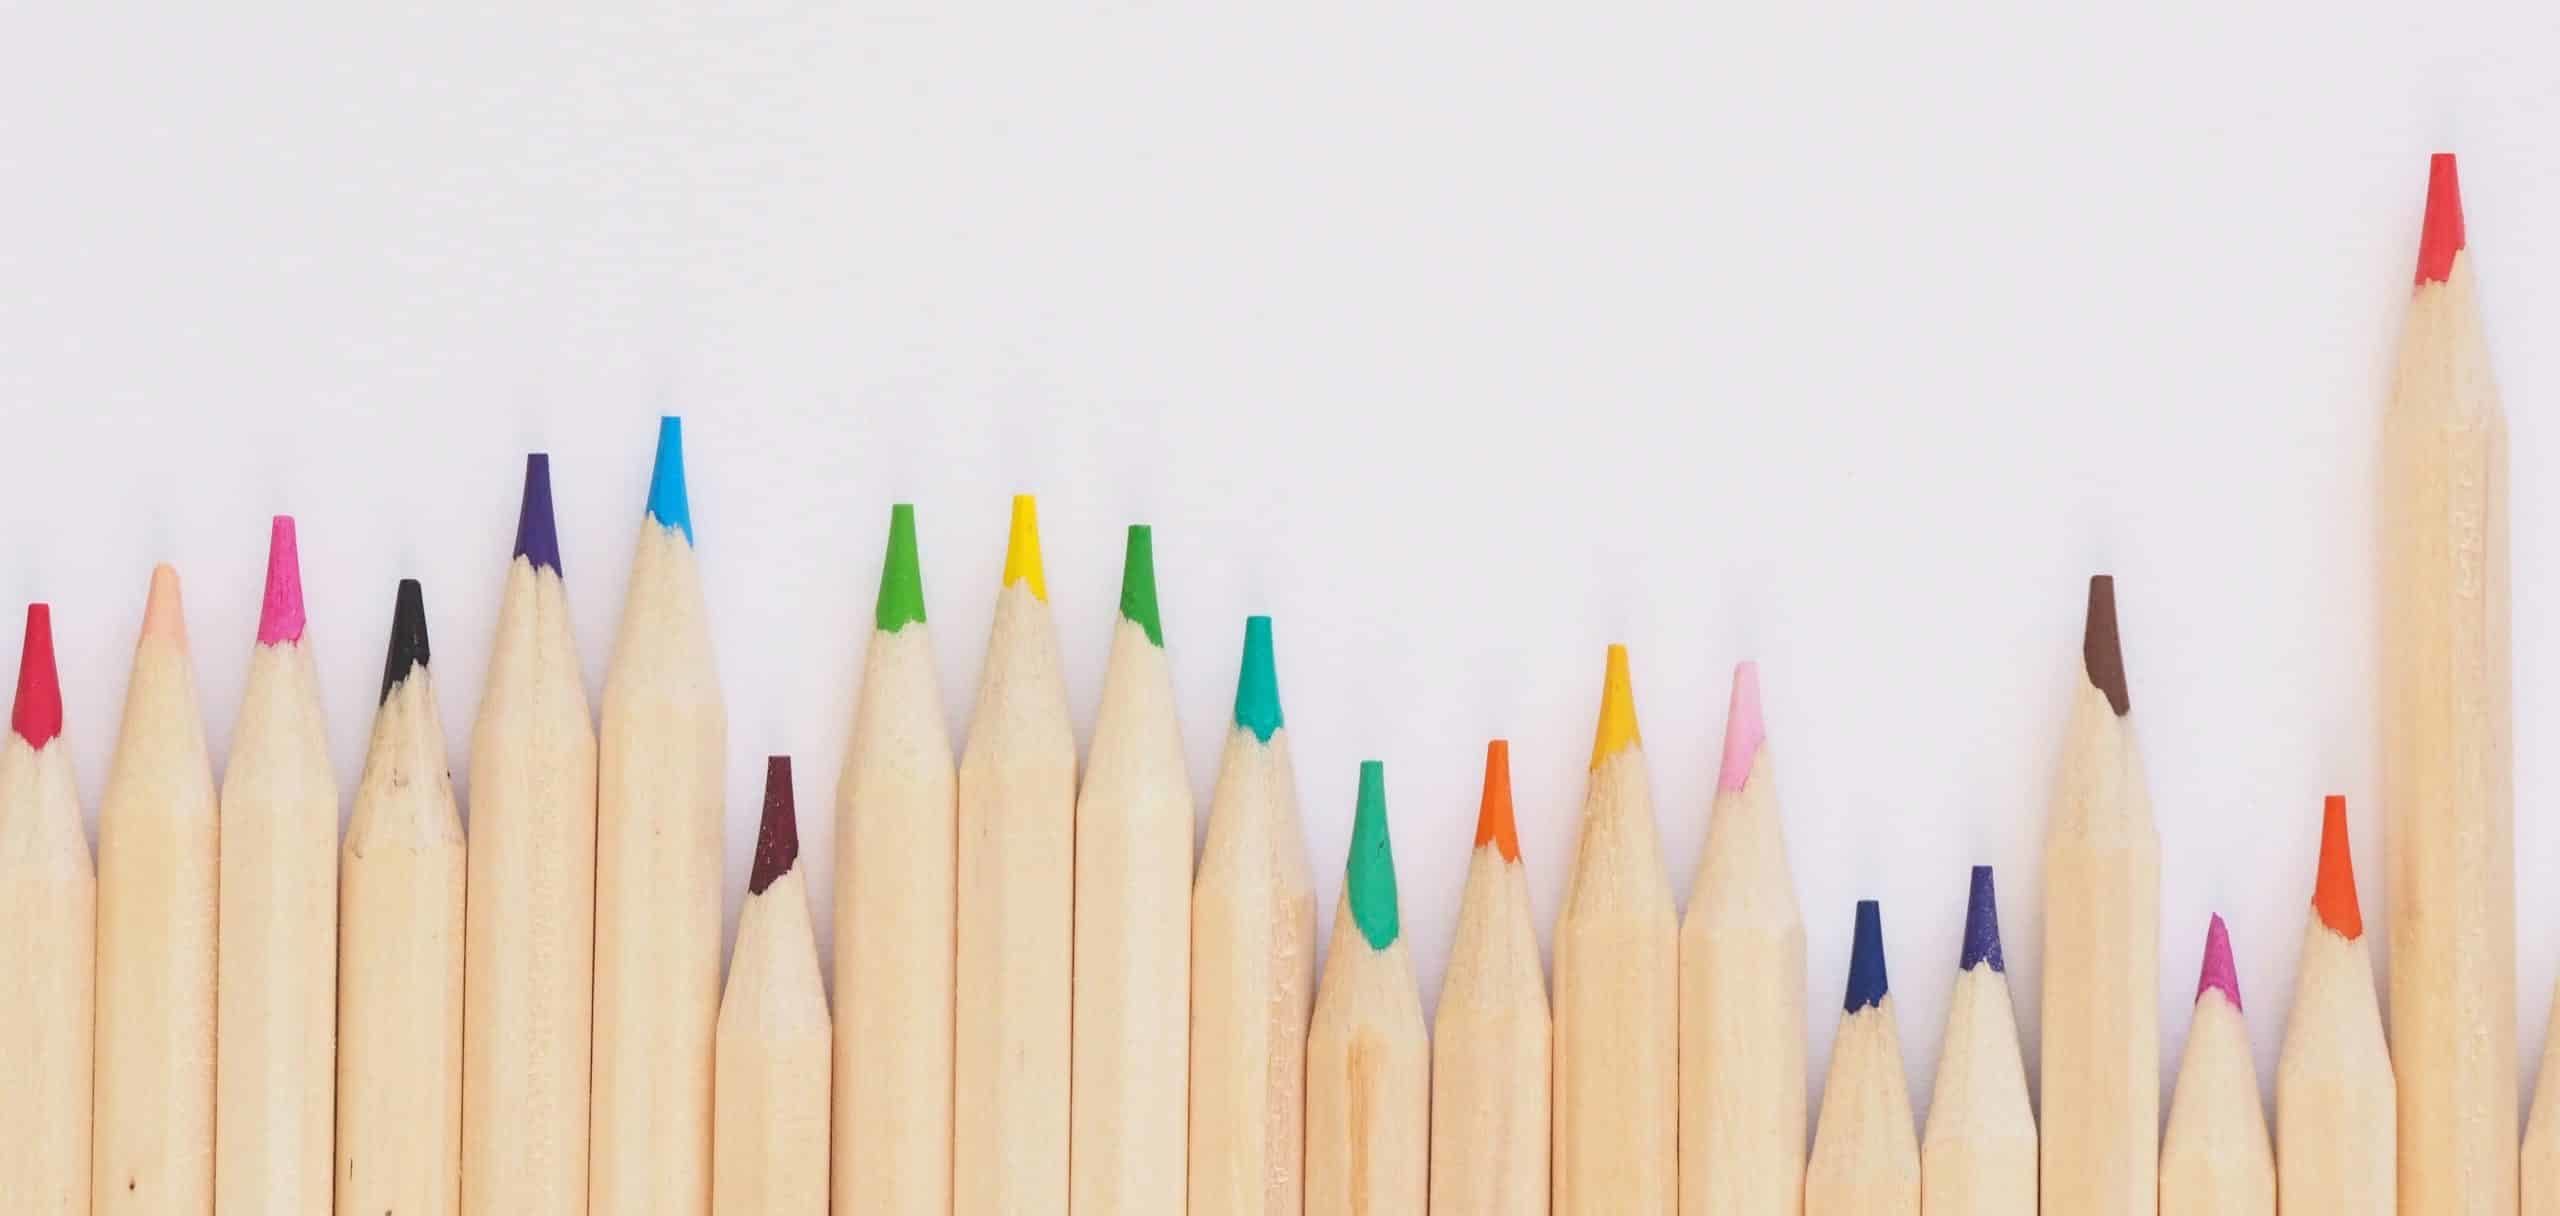 Colored pencils unevenly lined up against a white background.